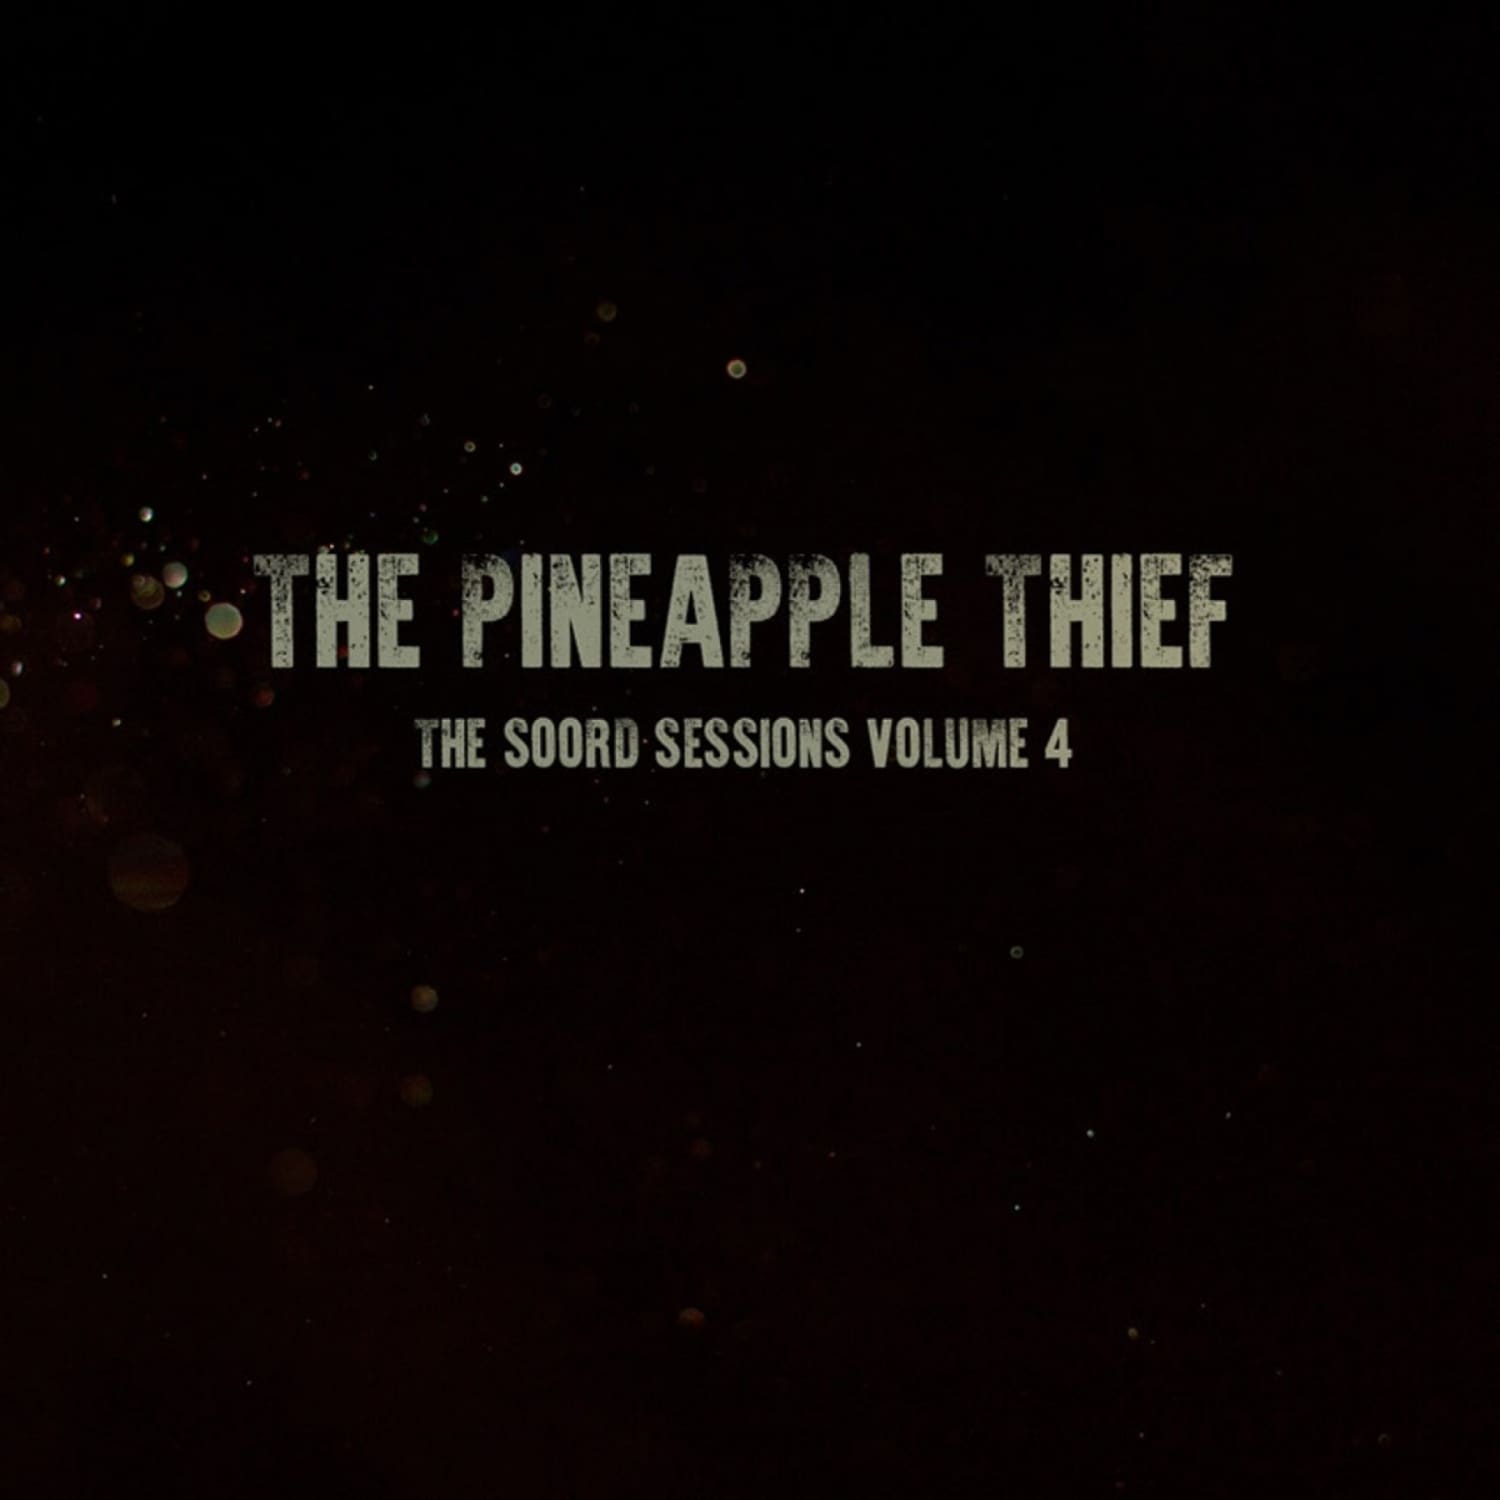 The Pineapple Thief - THE SOORD SESSIONS 